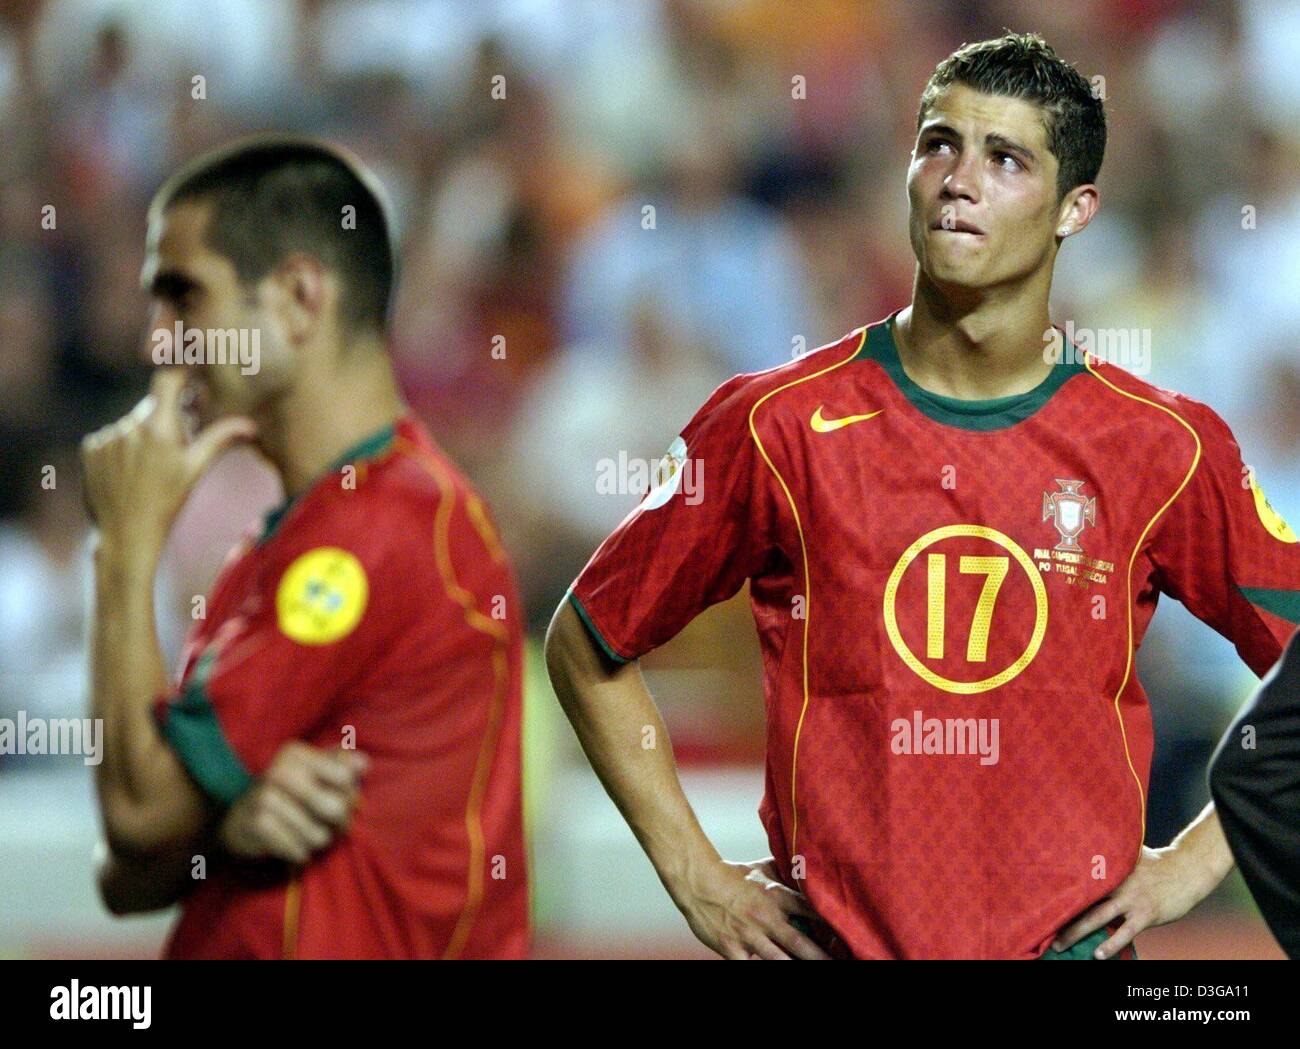 dpa) - Portuguese midfielder Cristiano Ronaldo (R) cries some tears after  his team lost the Euro 2004 soccer final between Portugal and Greece at Luz  Stadium in Lisbon, Portugal, 4 July 2004.